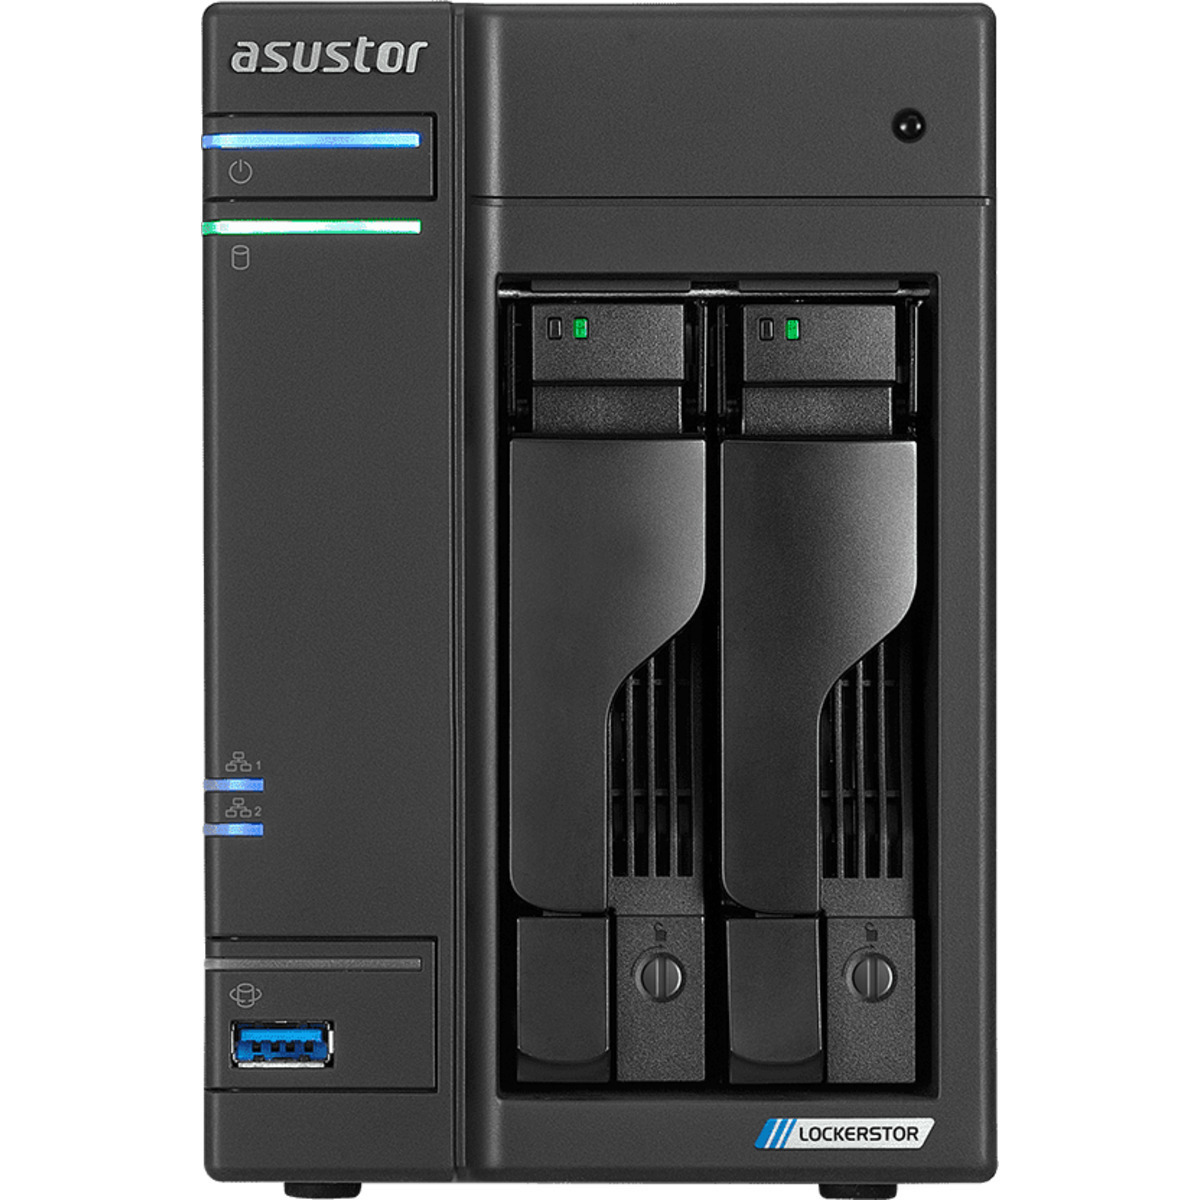 buy $722 ASUSTOR AS6602T Lockerstor 2 1tb Desktop NAS - Network Attached Storage Device 2x500gb Western Digital Red SA500 WDS500G1R0A 2.5 SATA 6Gb/s SSD NAS Class Drives Installed - Burn-In Tested - FREE RAM UPGRADE - nas headquarters buy network attached storage server device das new raid-5 free shipping usa AS6602T Lockerstor 2